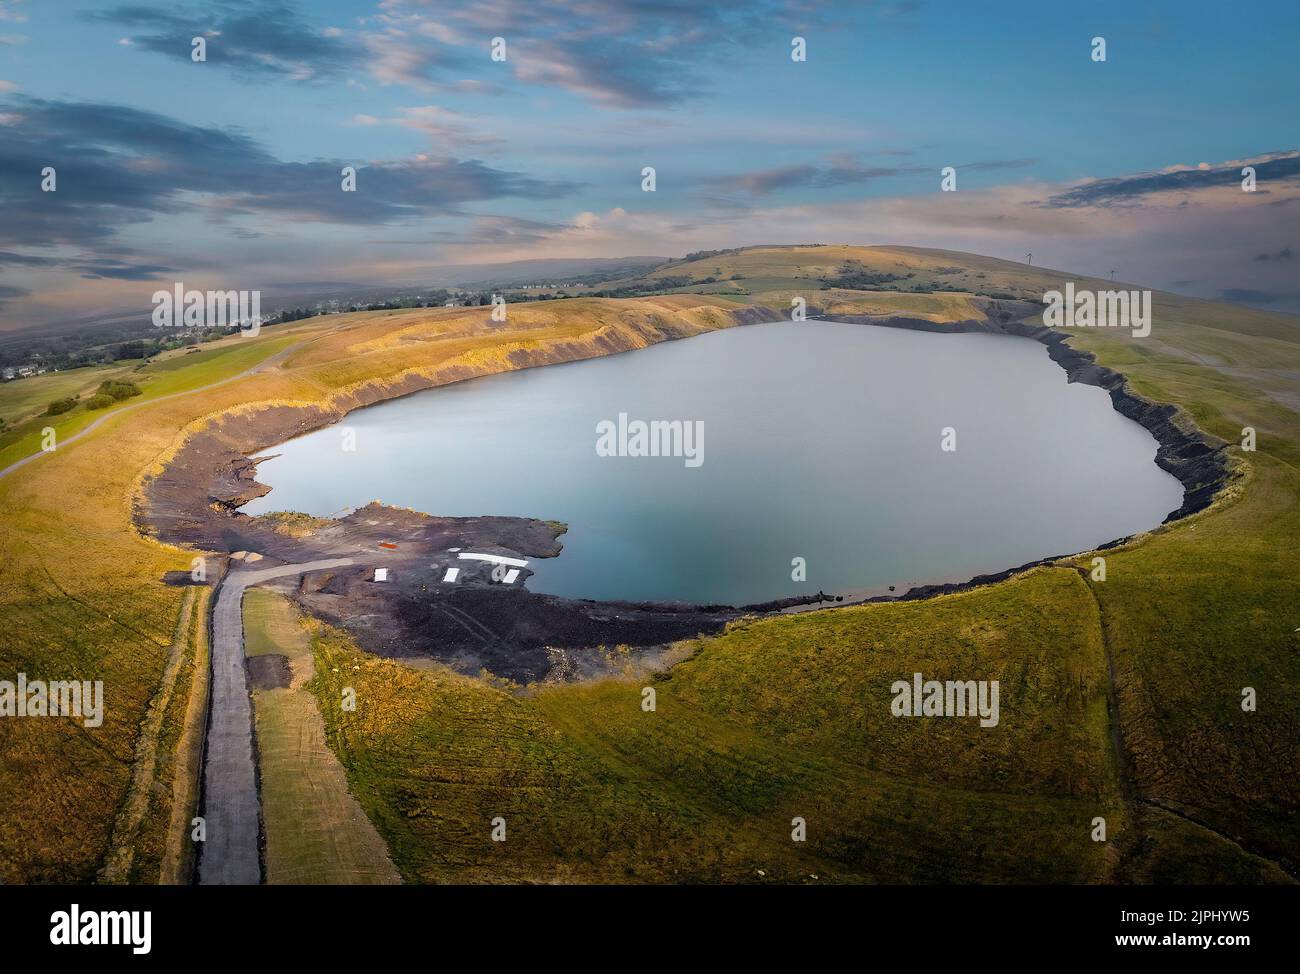 East Pit lake situated between the villages of Tairgwaith, Brynamman and Cwmllynfell in South Wales UK Stock Photo